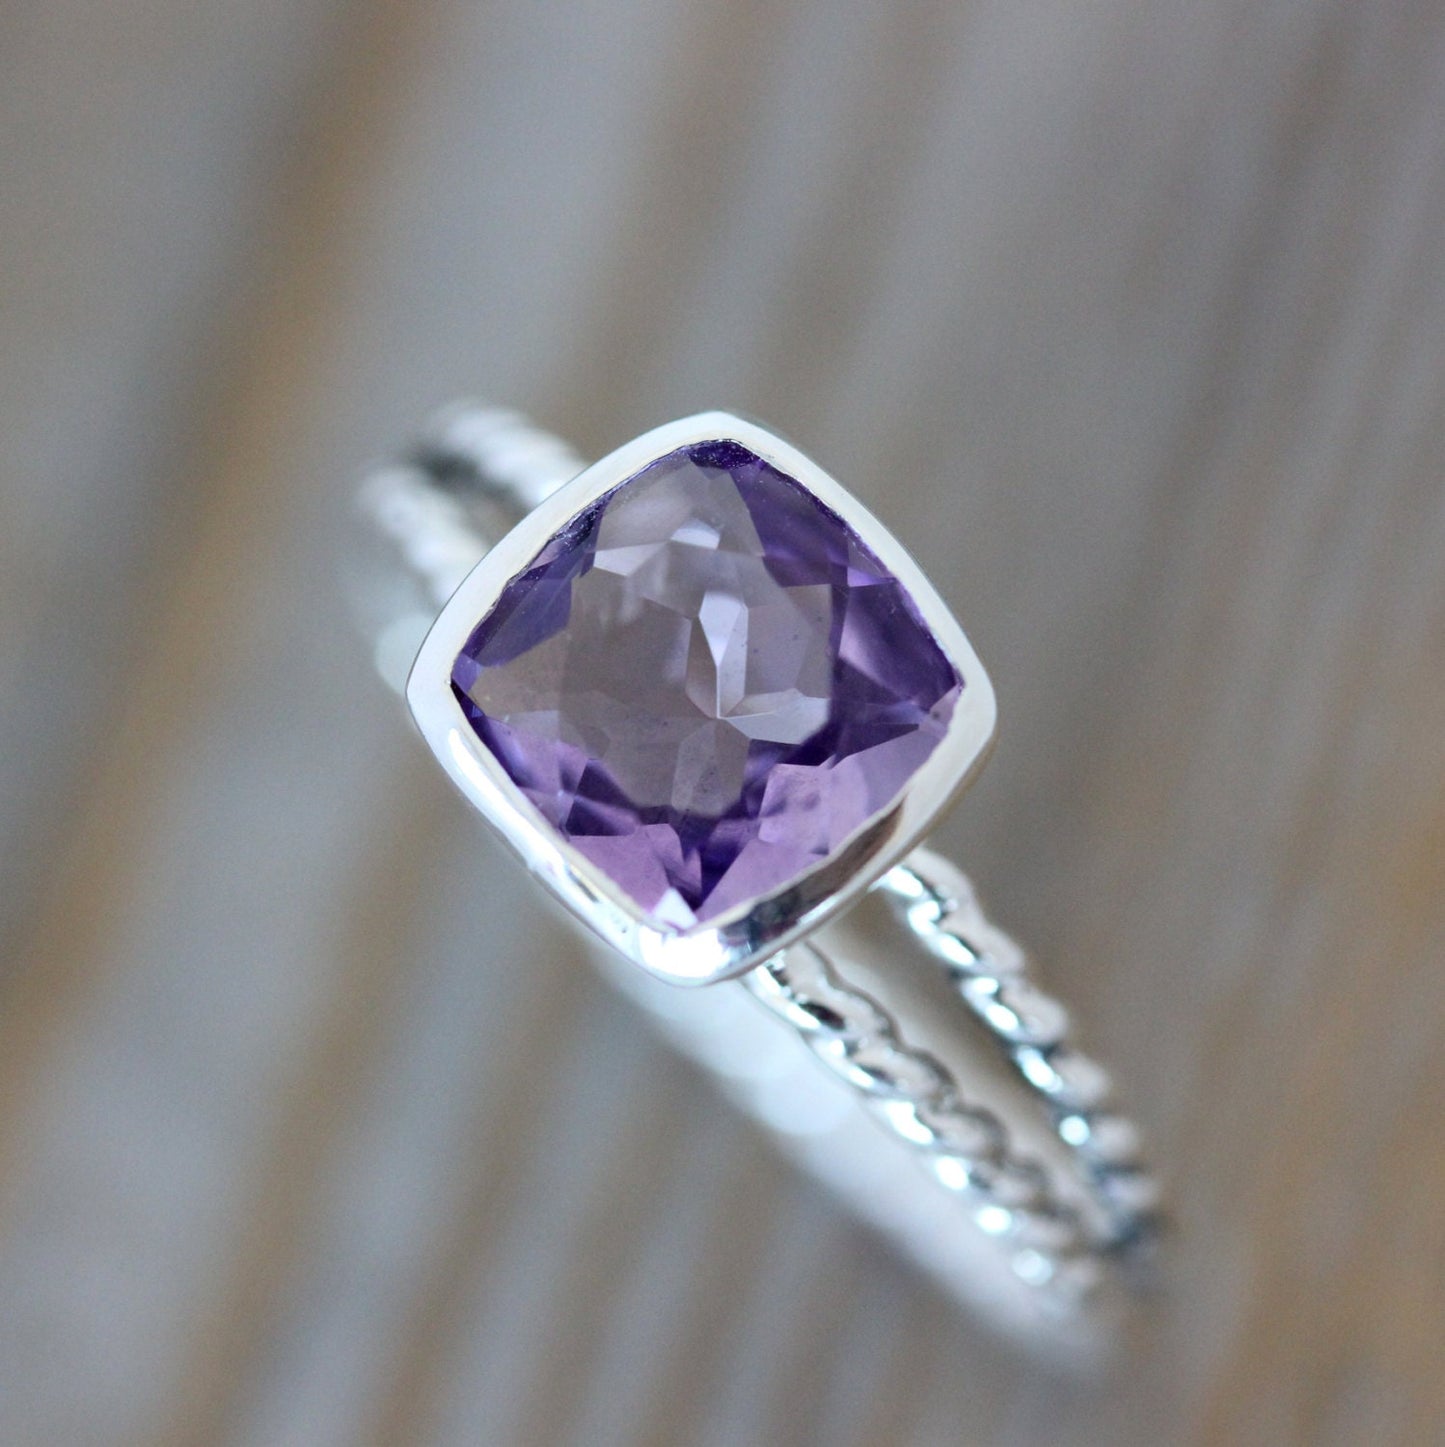 Handmade Purple Amethyst Cushion Cut Ring in Sterling Silver by Cassin Jewelry.